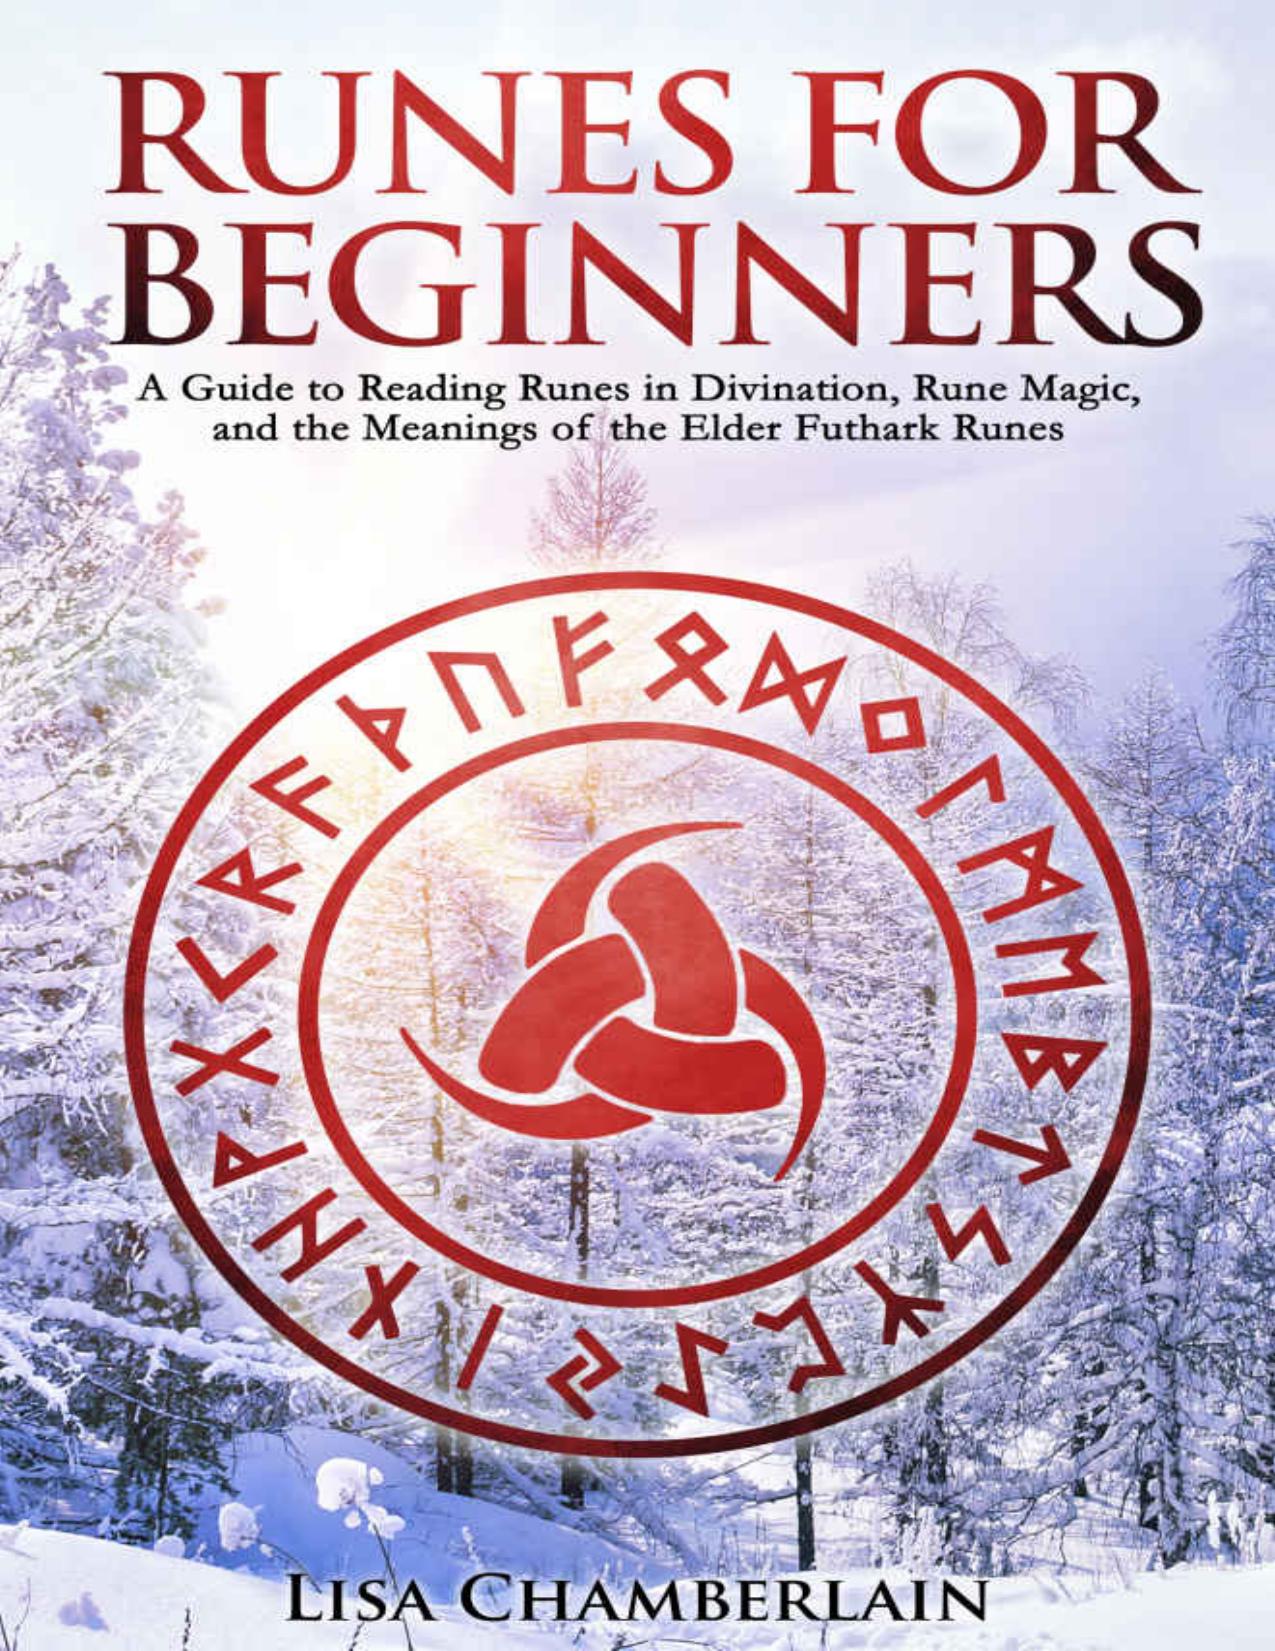 Runes for Beginners: A Guide to Reading Runes in Divination, Rune Magic, and the Meaning of the Elder Futhark Runes